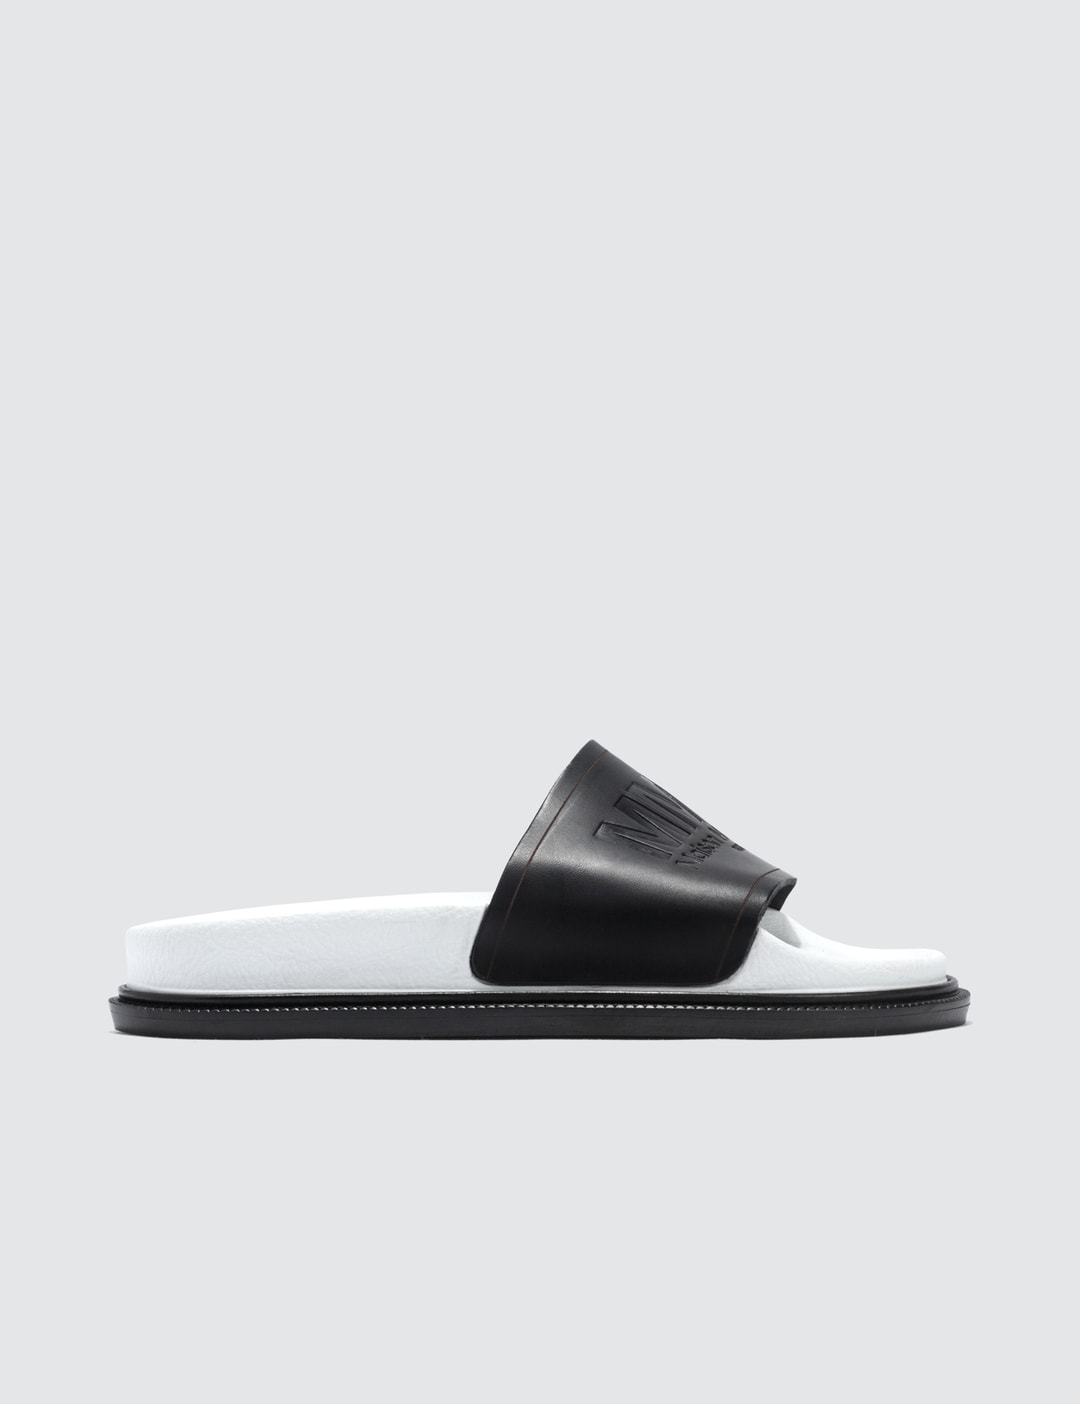 MM6 Maison Margiela - Leather Slippers | HBX - Globally Curated Fashion ...